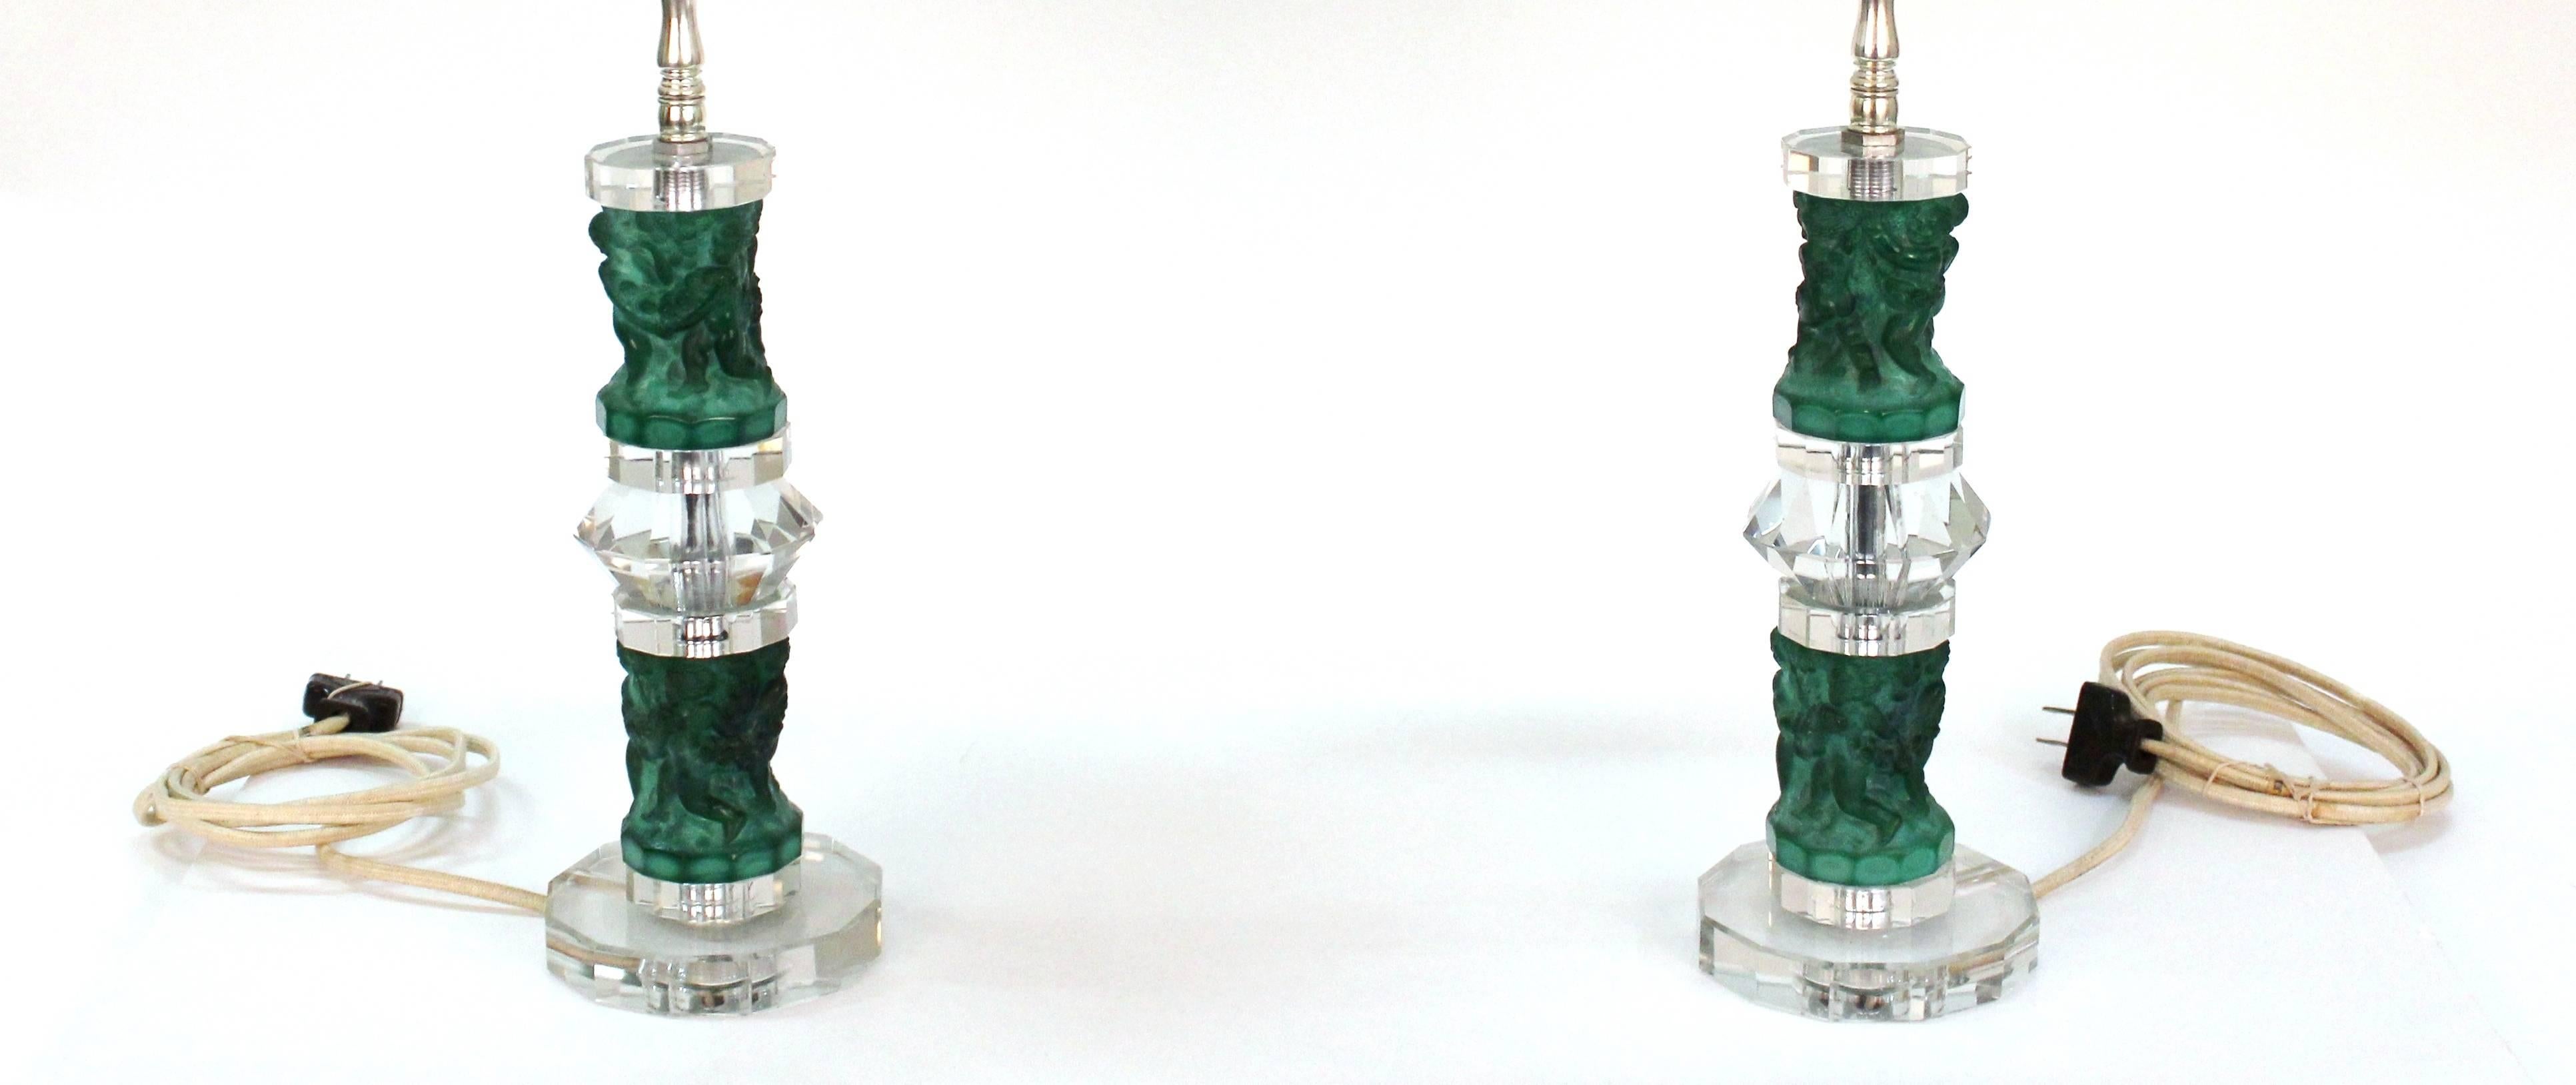 Pair of Art Deco era Czechoslovakian table lamps, produced circa 1930s, featuring reliefs with dancing classical figures and floral swags in molded glass and faceted crystal mounts. Includes new silver shades. Very good vintage condition, consistent